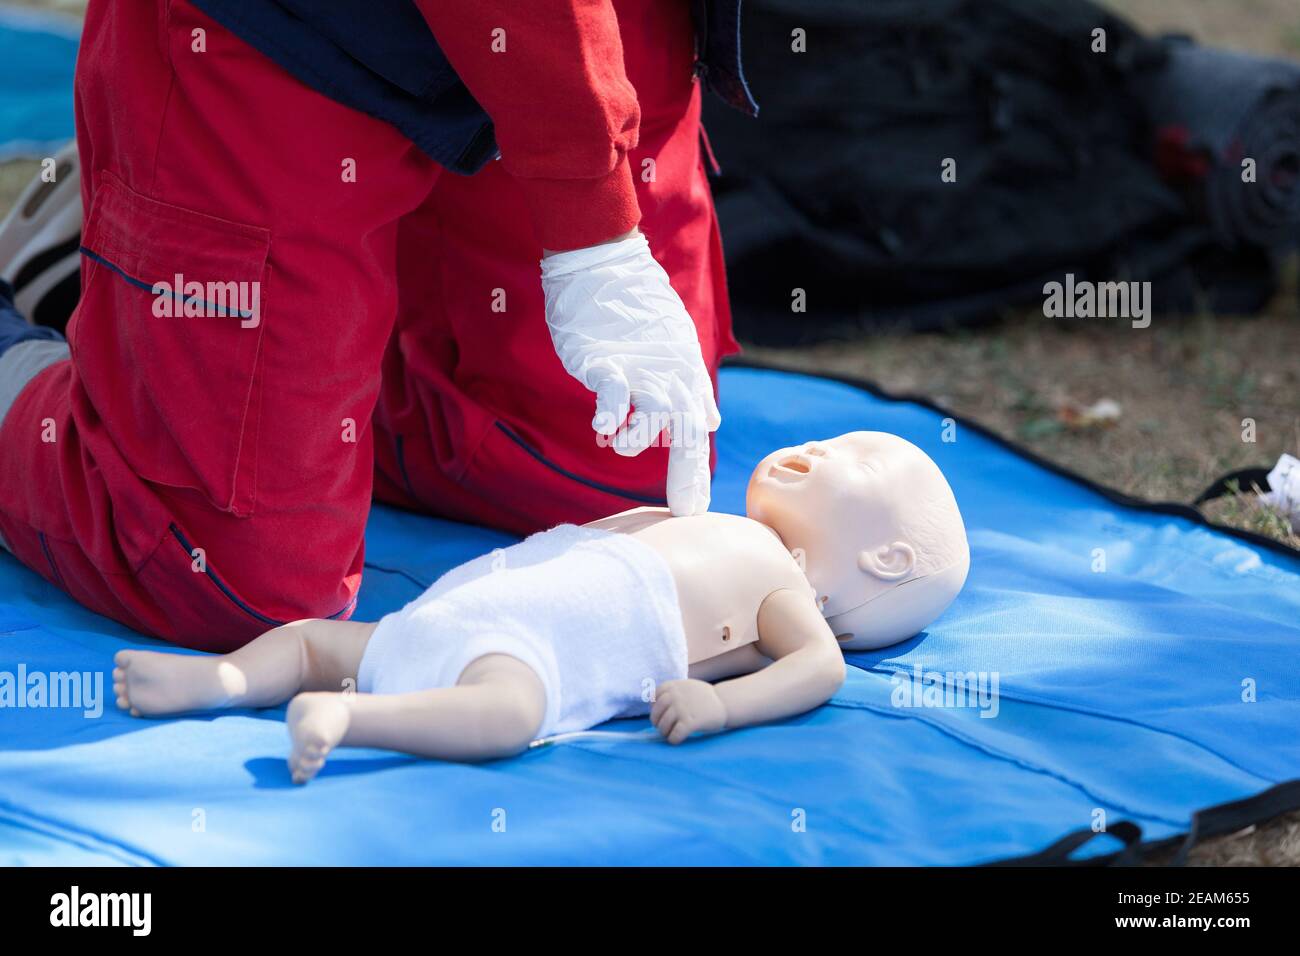 Baby CPR dummy first aid training. Heart massage. Stock Photo